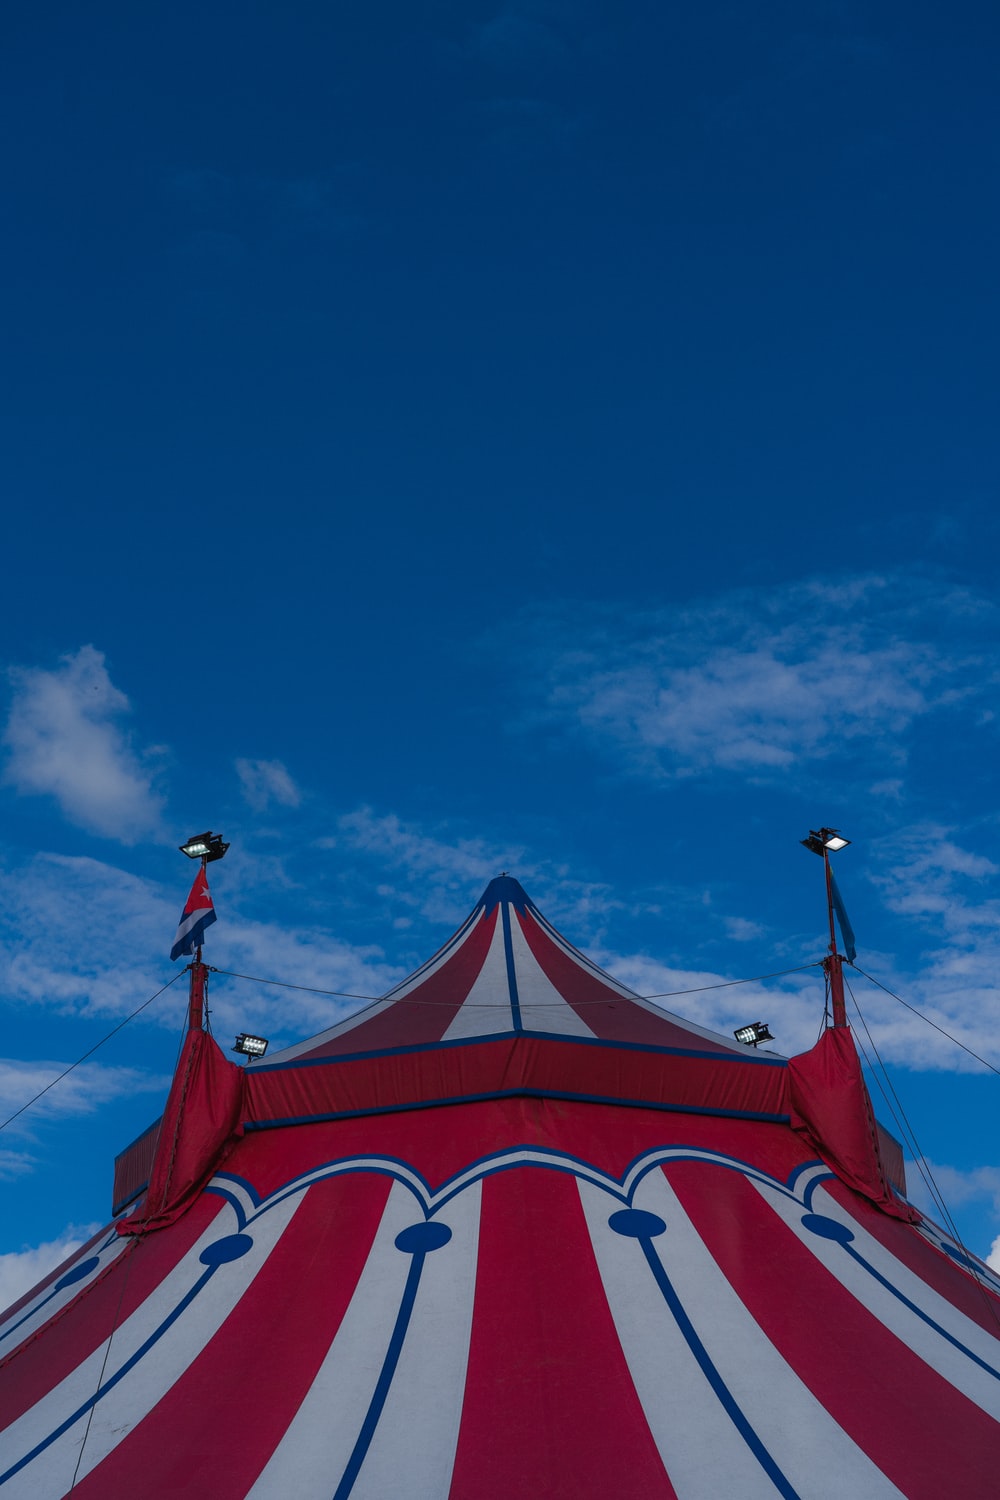 Circus Tent Picture. Download Free Image